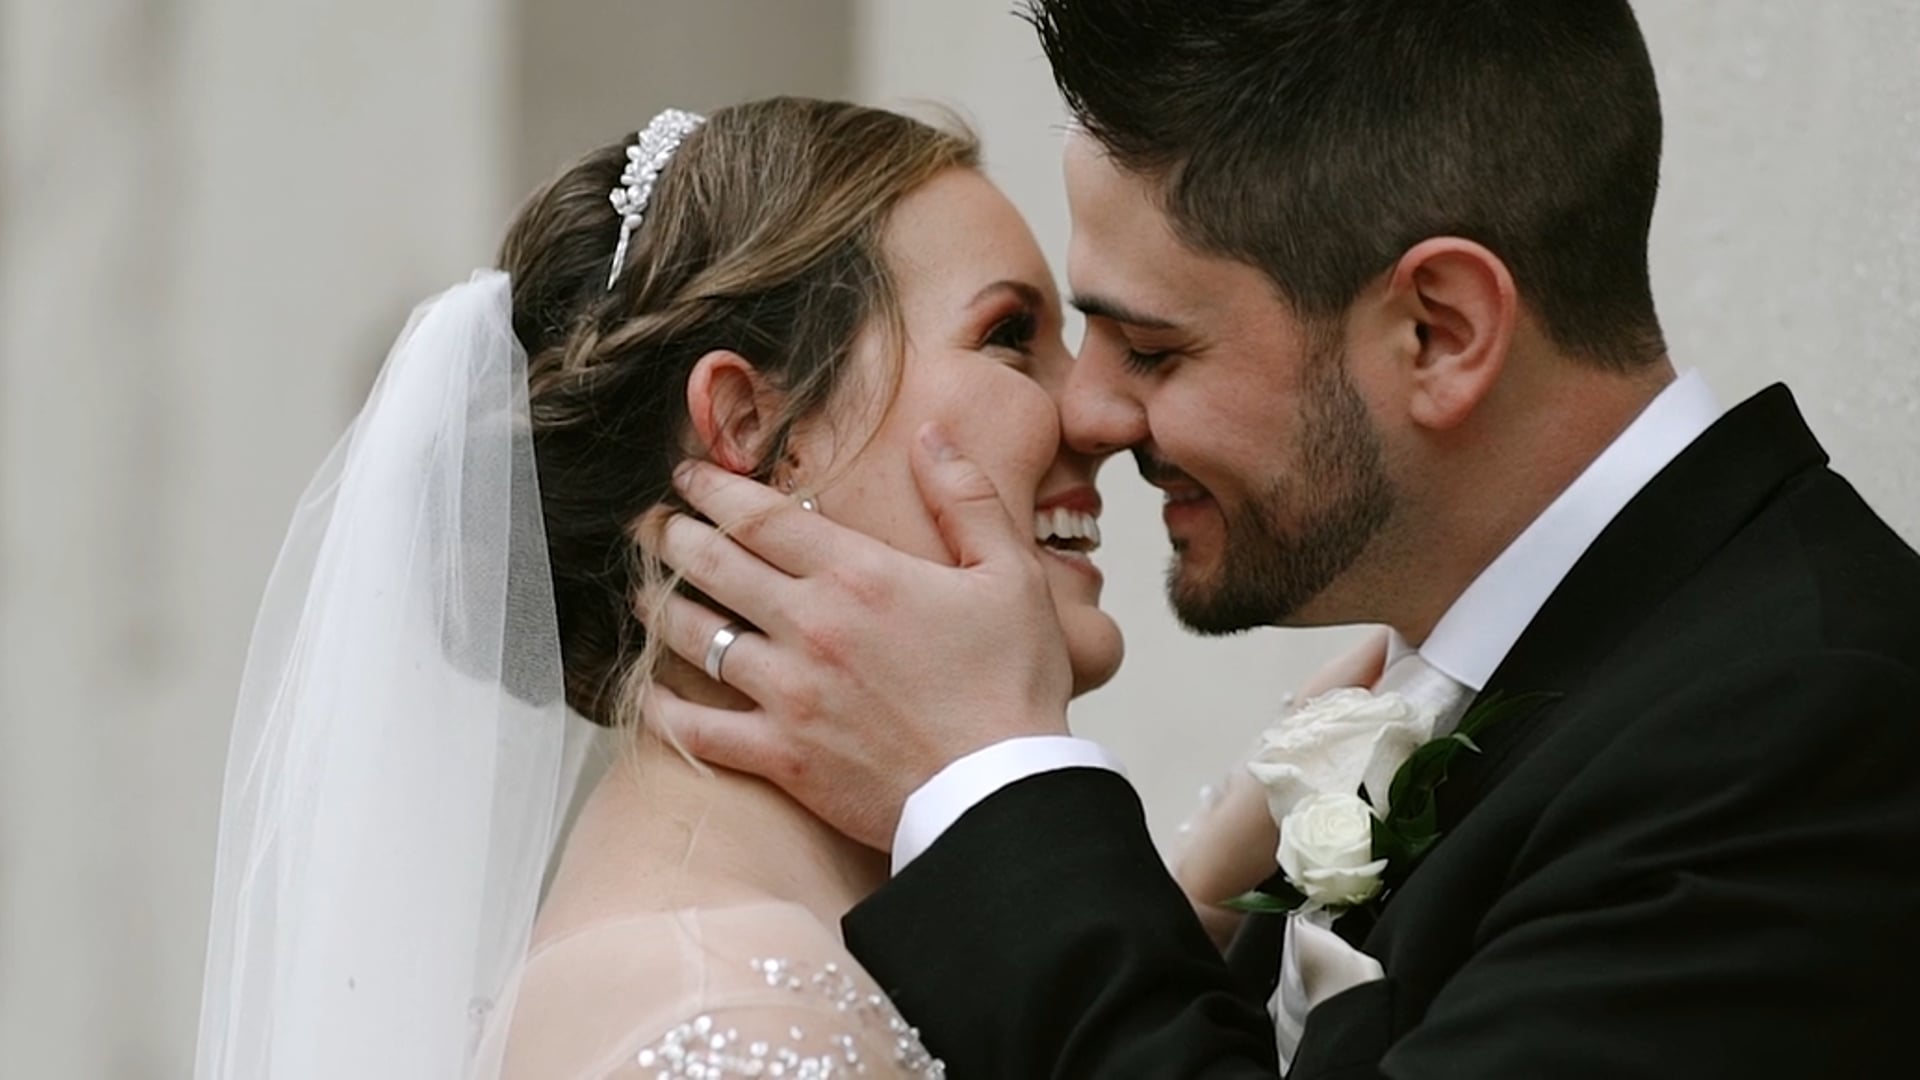 Alexandria and Michael | The Highlight